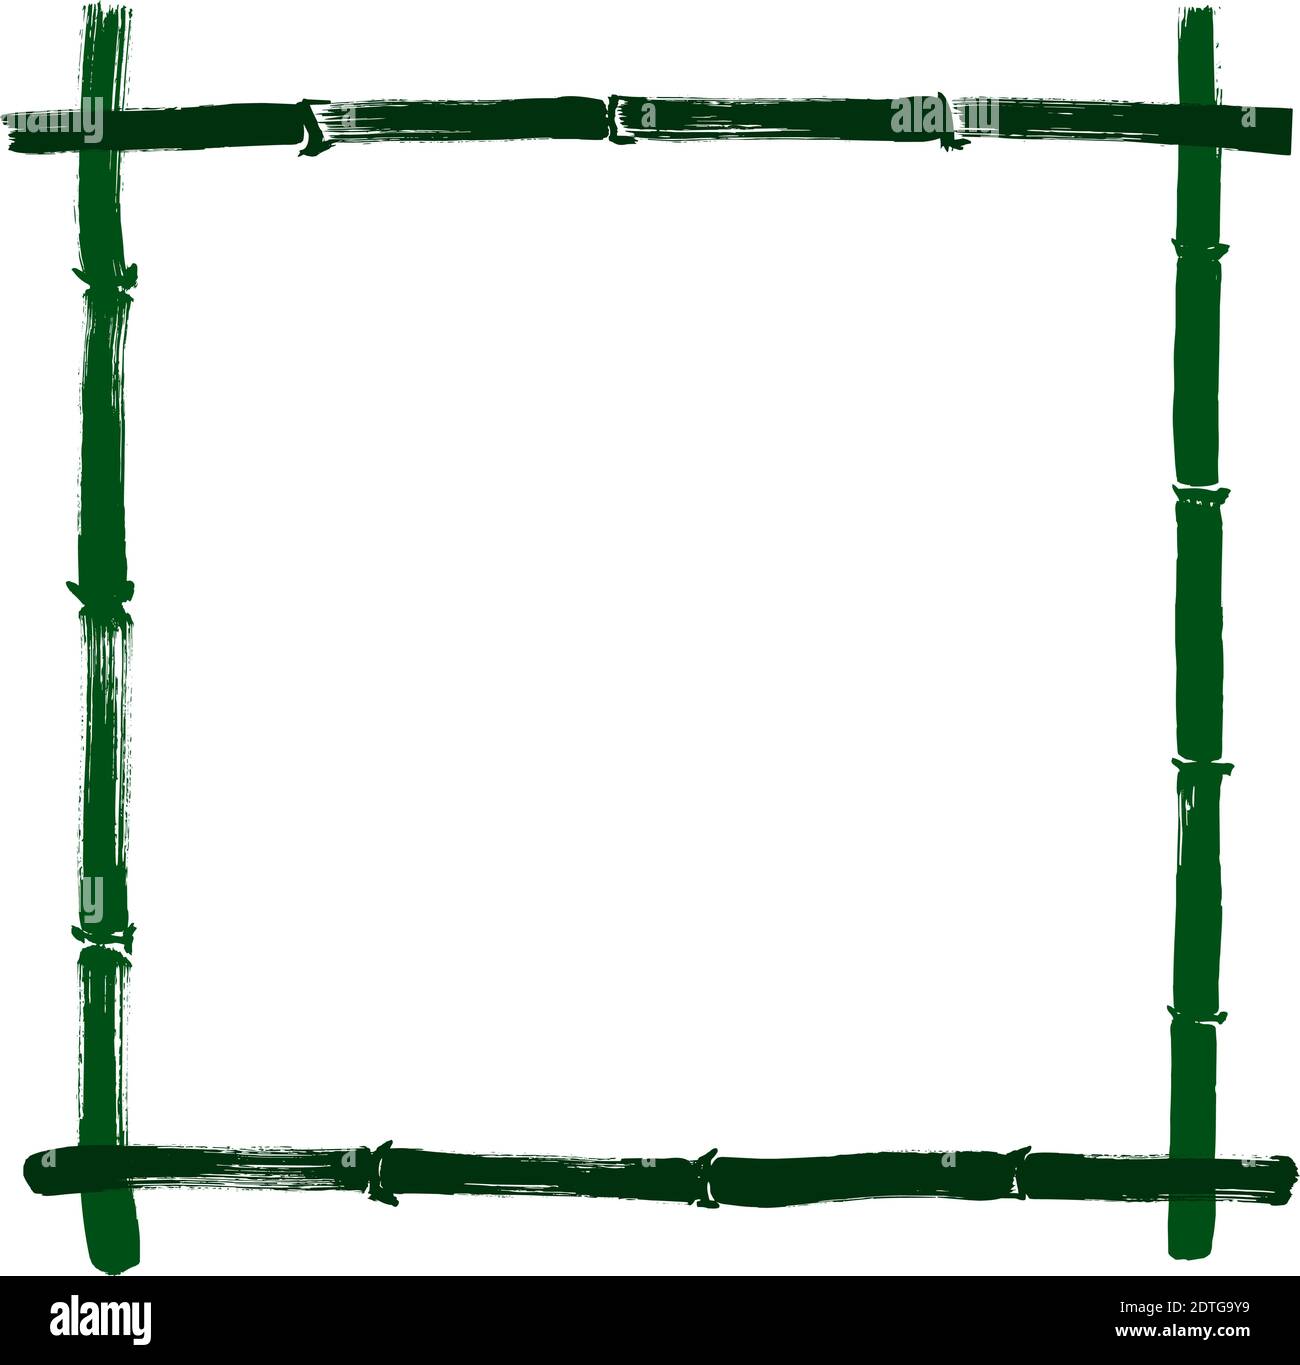 Hand drawn illustration of a bamboo frame on white background. Easy editable layered vector illustration. Stock Vector